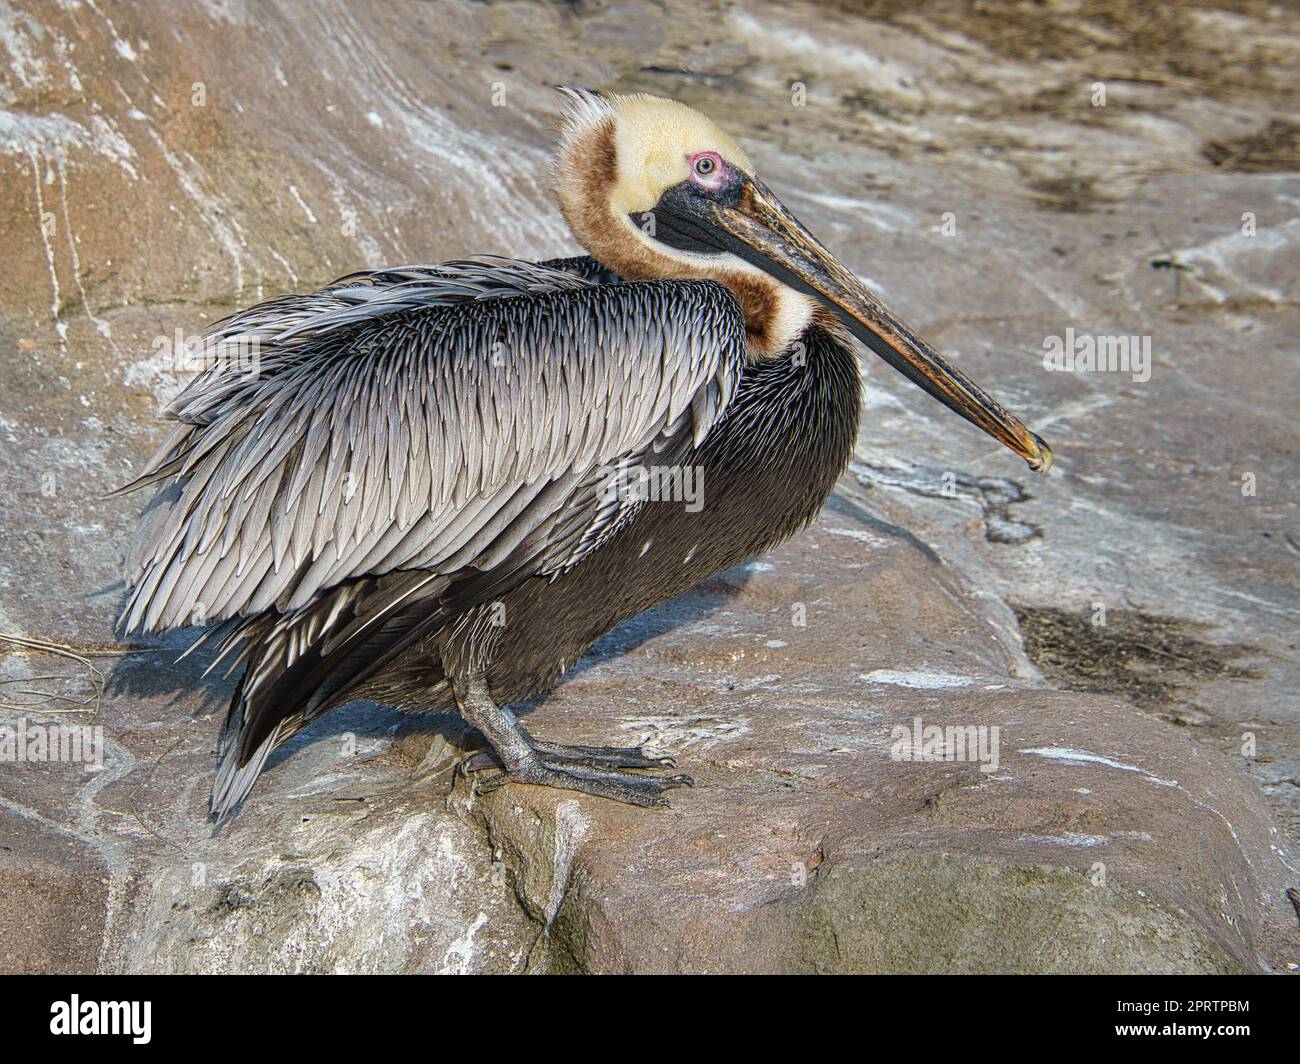 pelican recorded on a rock. large seabird with richly textured plumage. Stock Photo